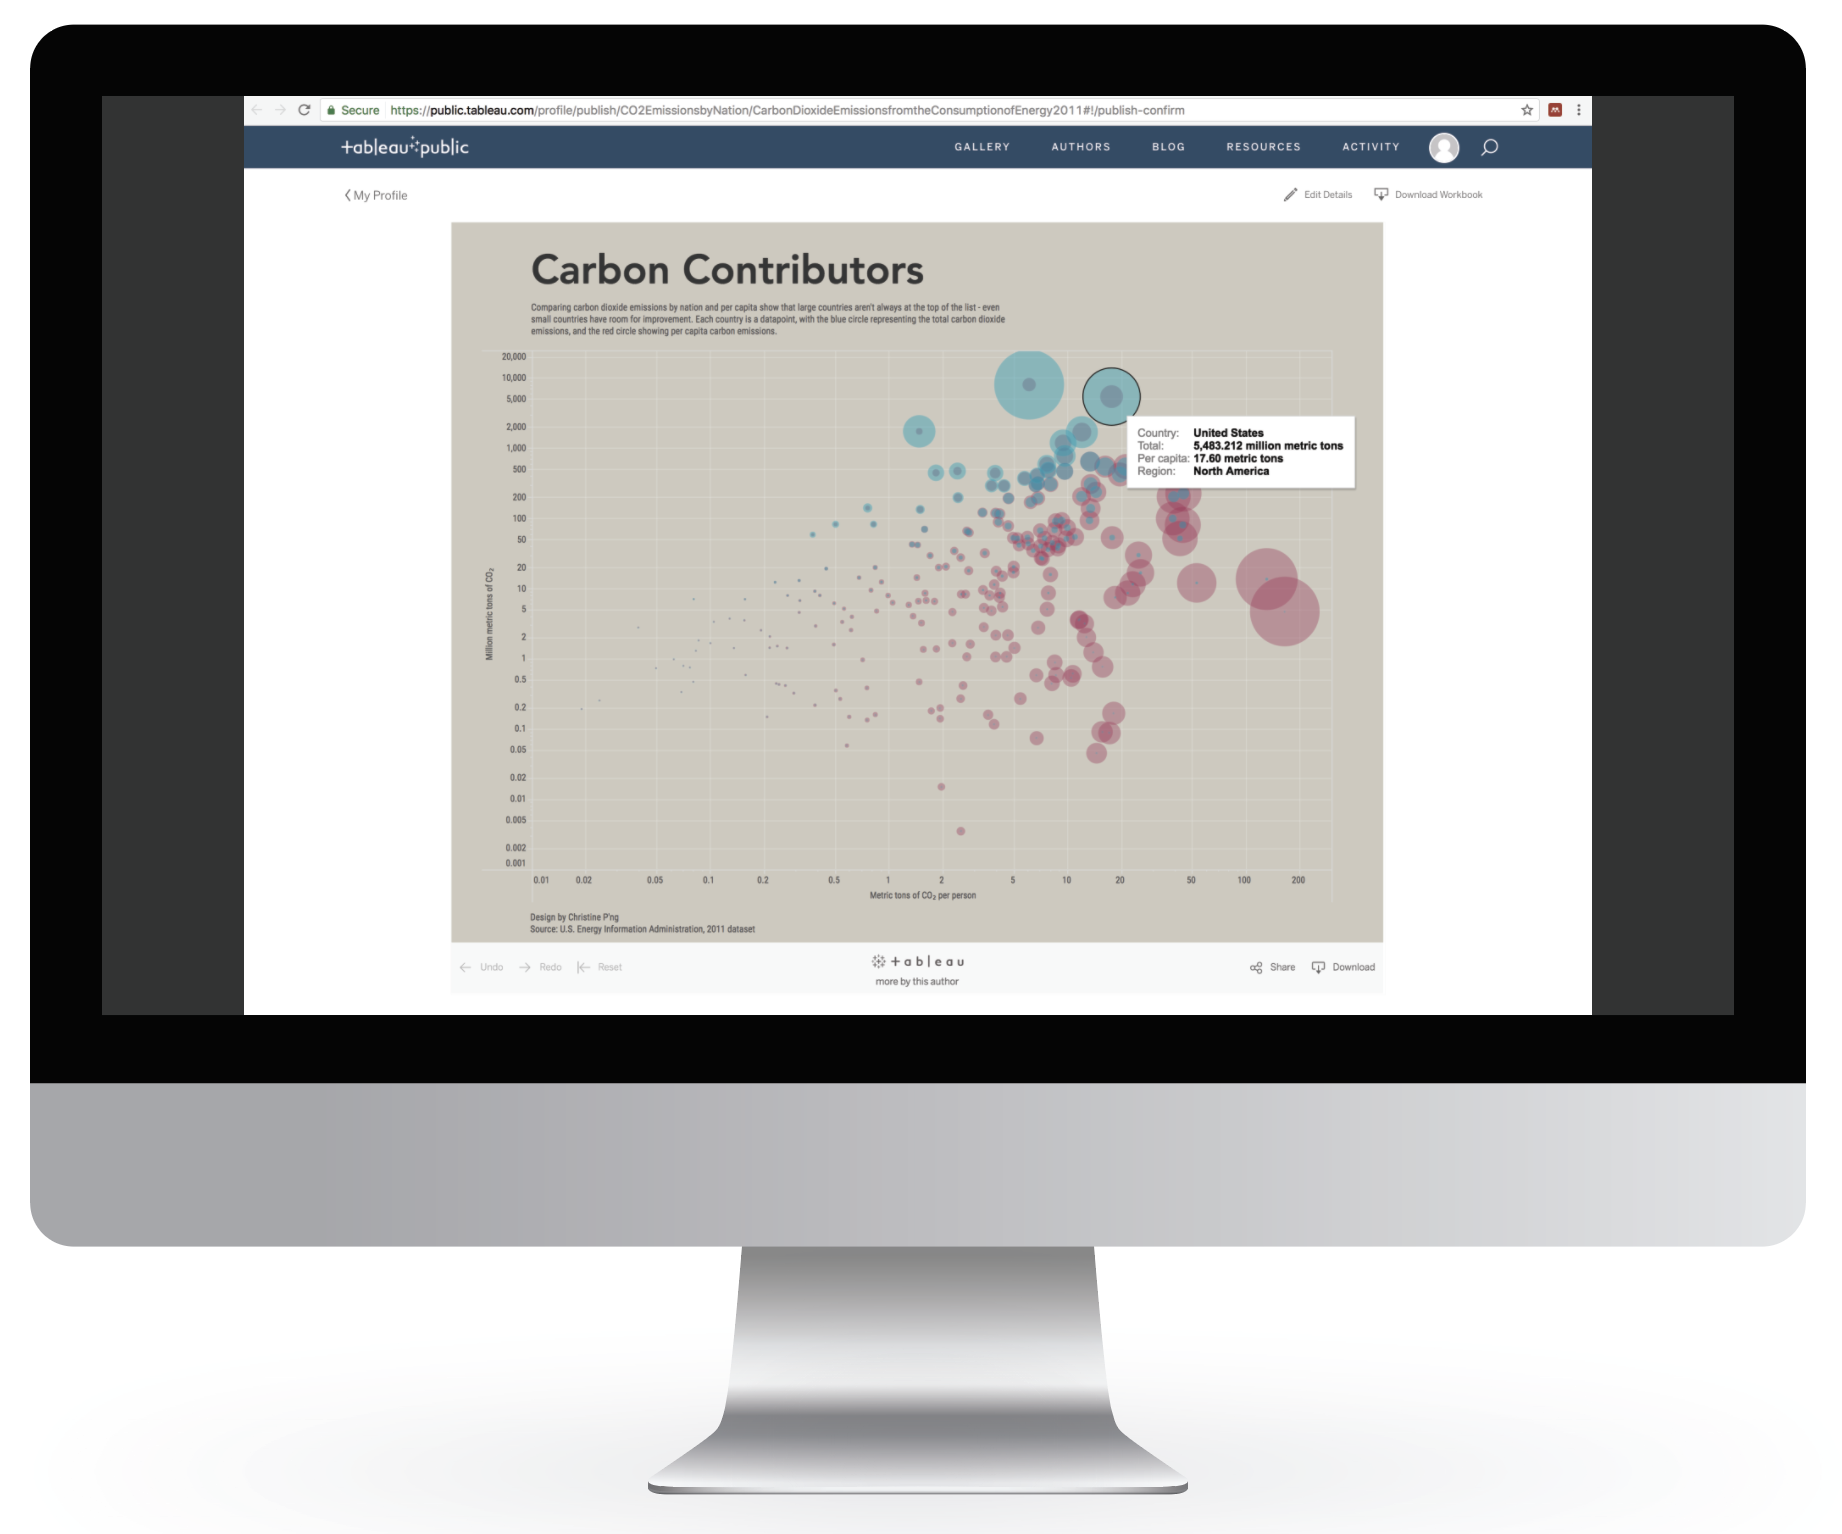 The final design - a bubble graph made in Tableau, shown within a desktop frame and tooltip activated